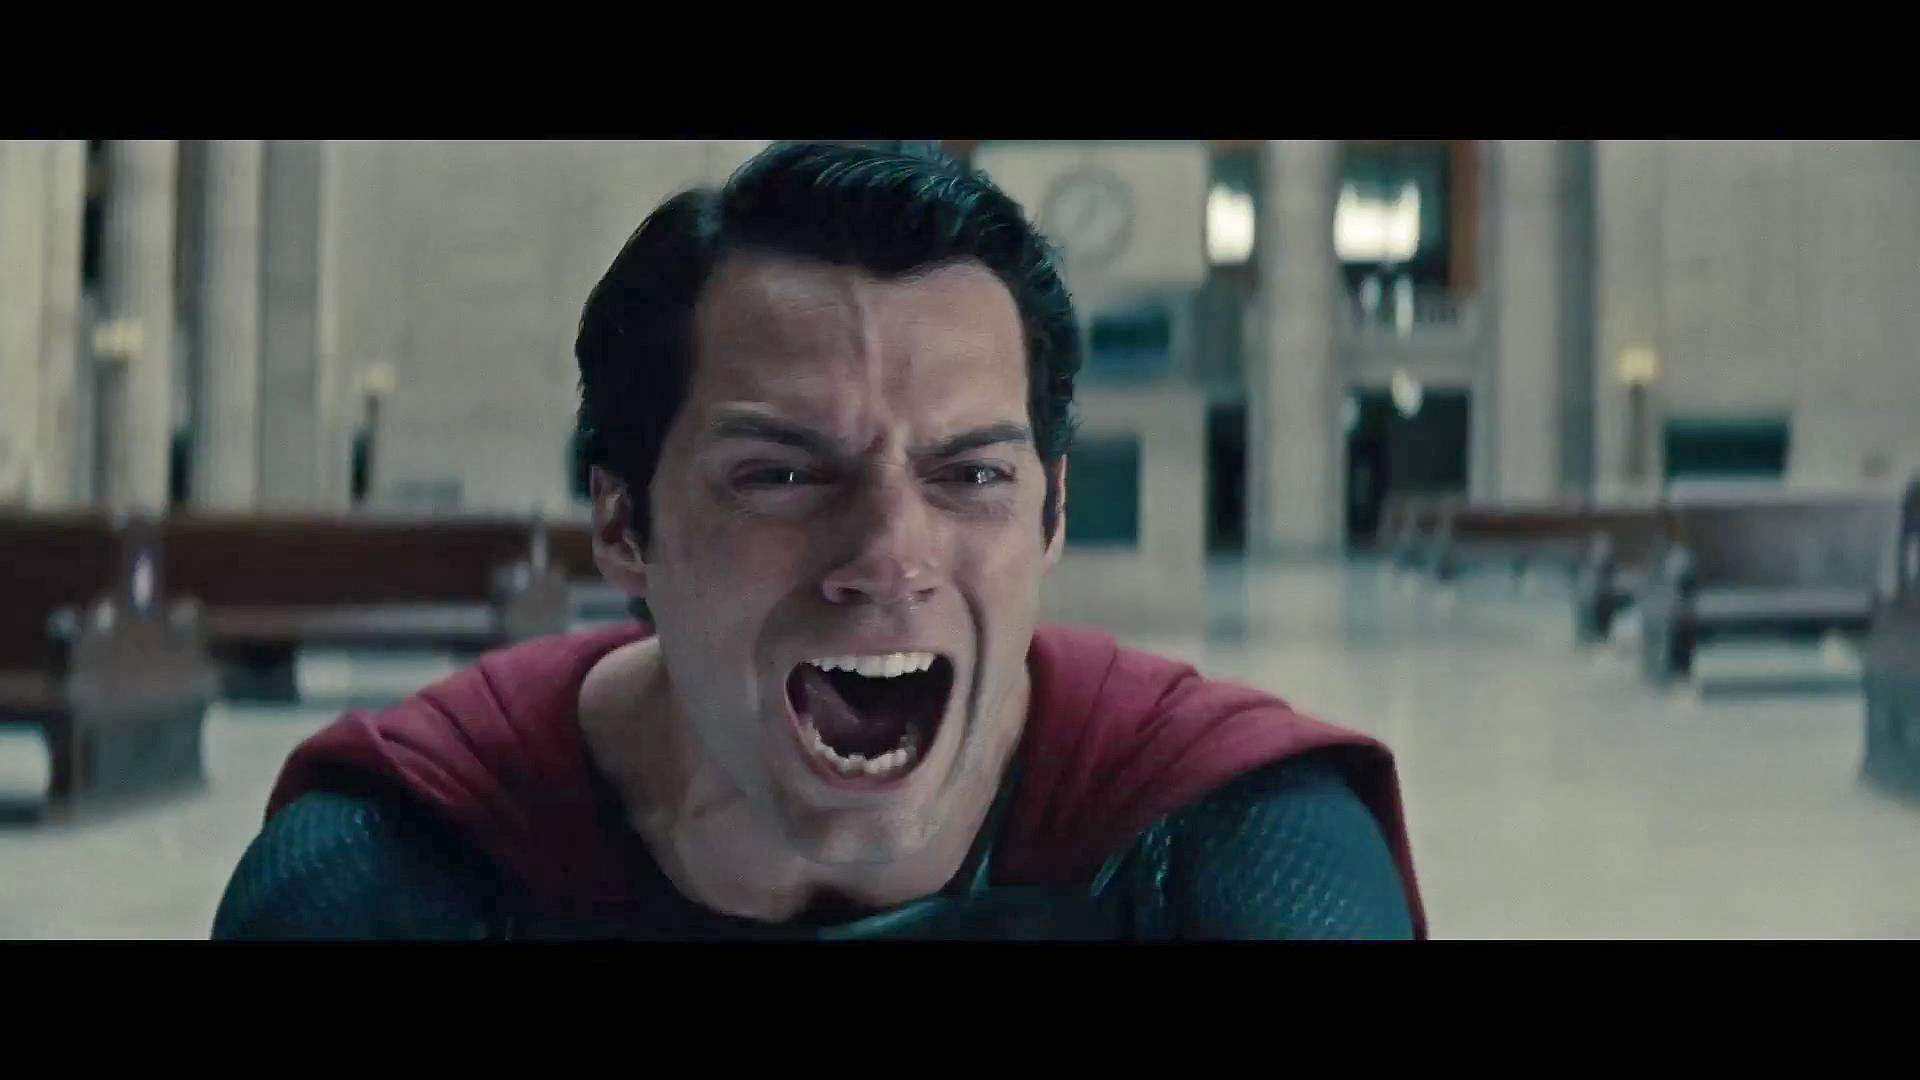 Superman is not happy due to new edits in Batman V Superman.